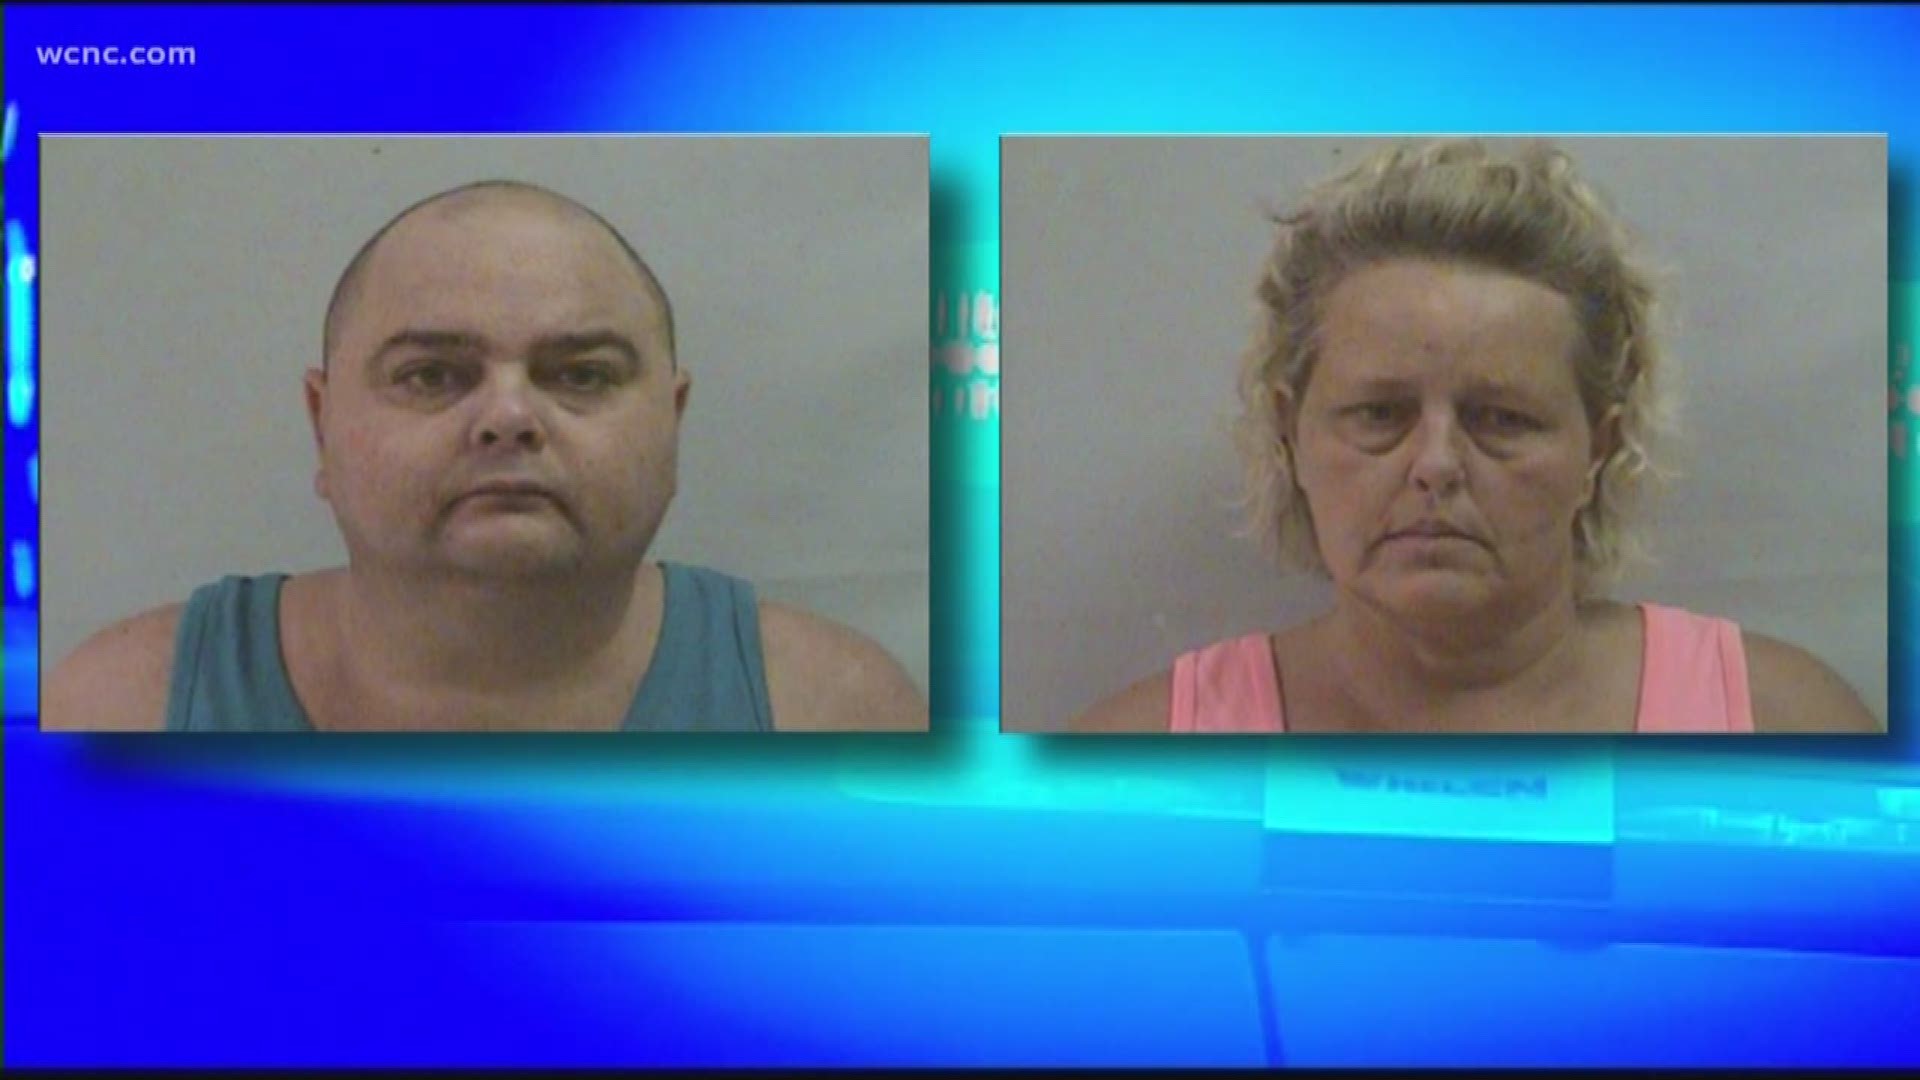 Two parents face charges after deputies in McDowell County said their son's friend fatally shot himself in the head with a revolver belonging to the couple.